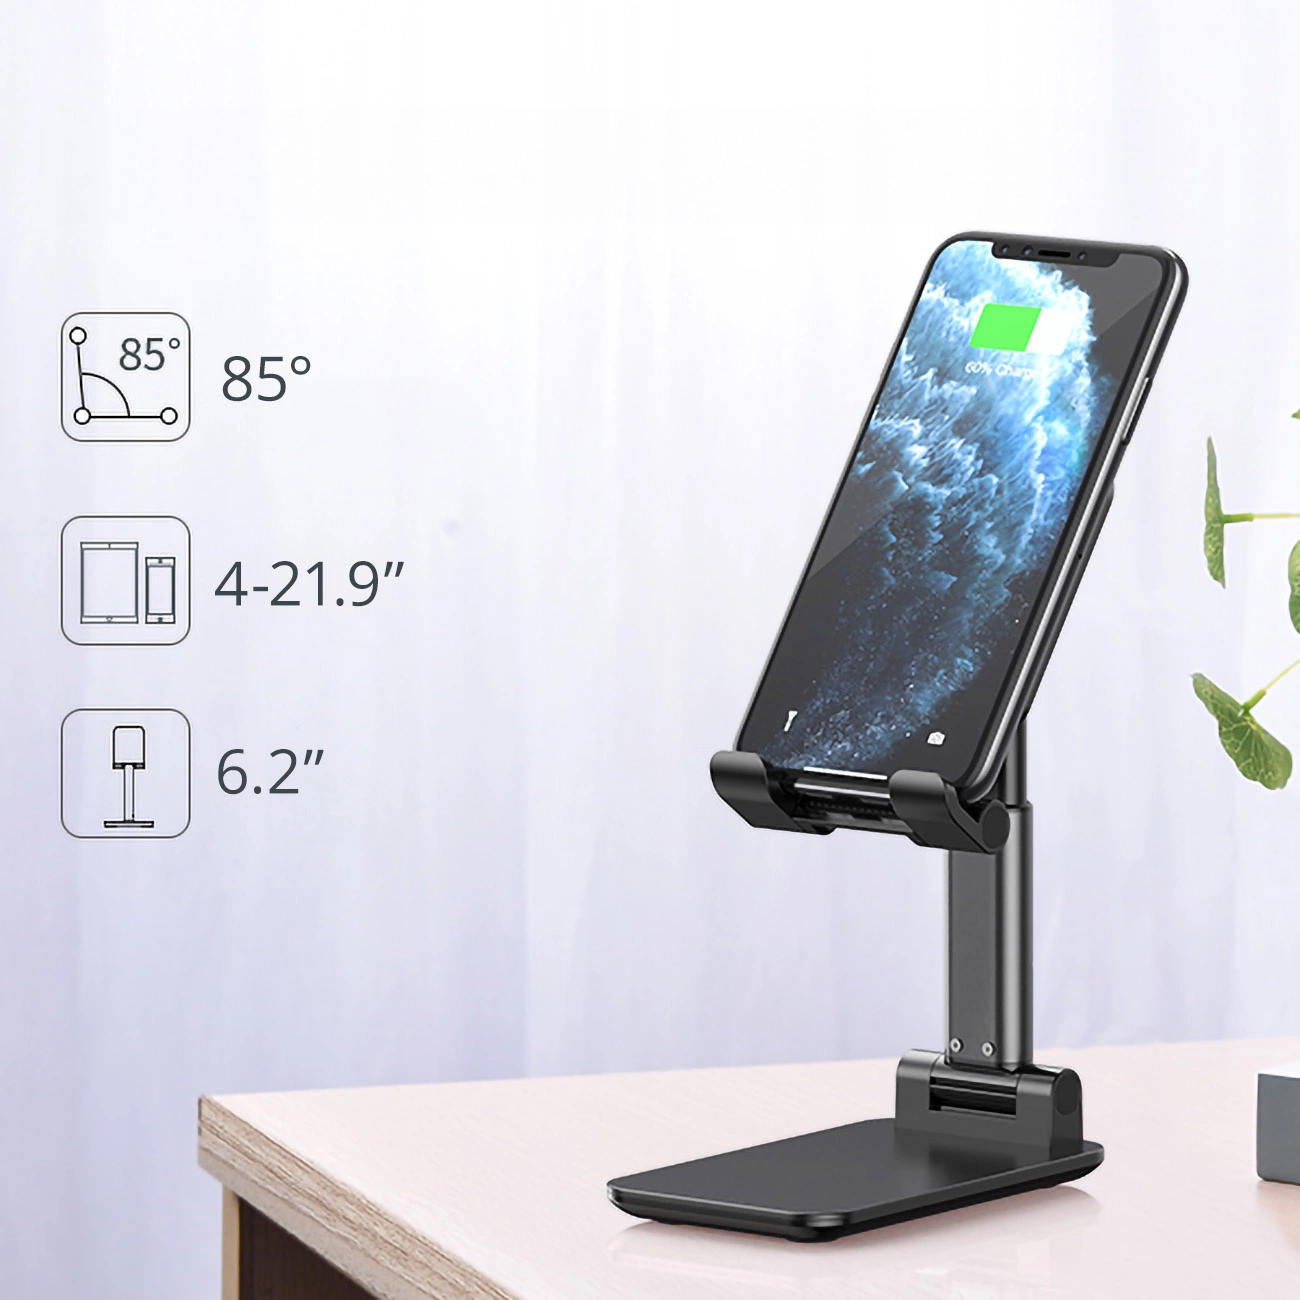 Choetech H88-BK stand standing on a desk with a smartphone and infographics showing the range of operation of the stand